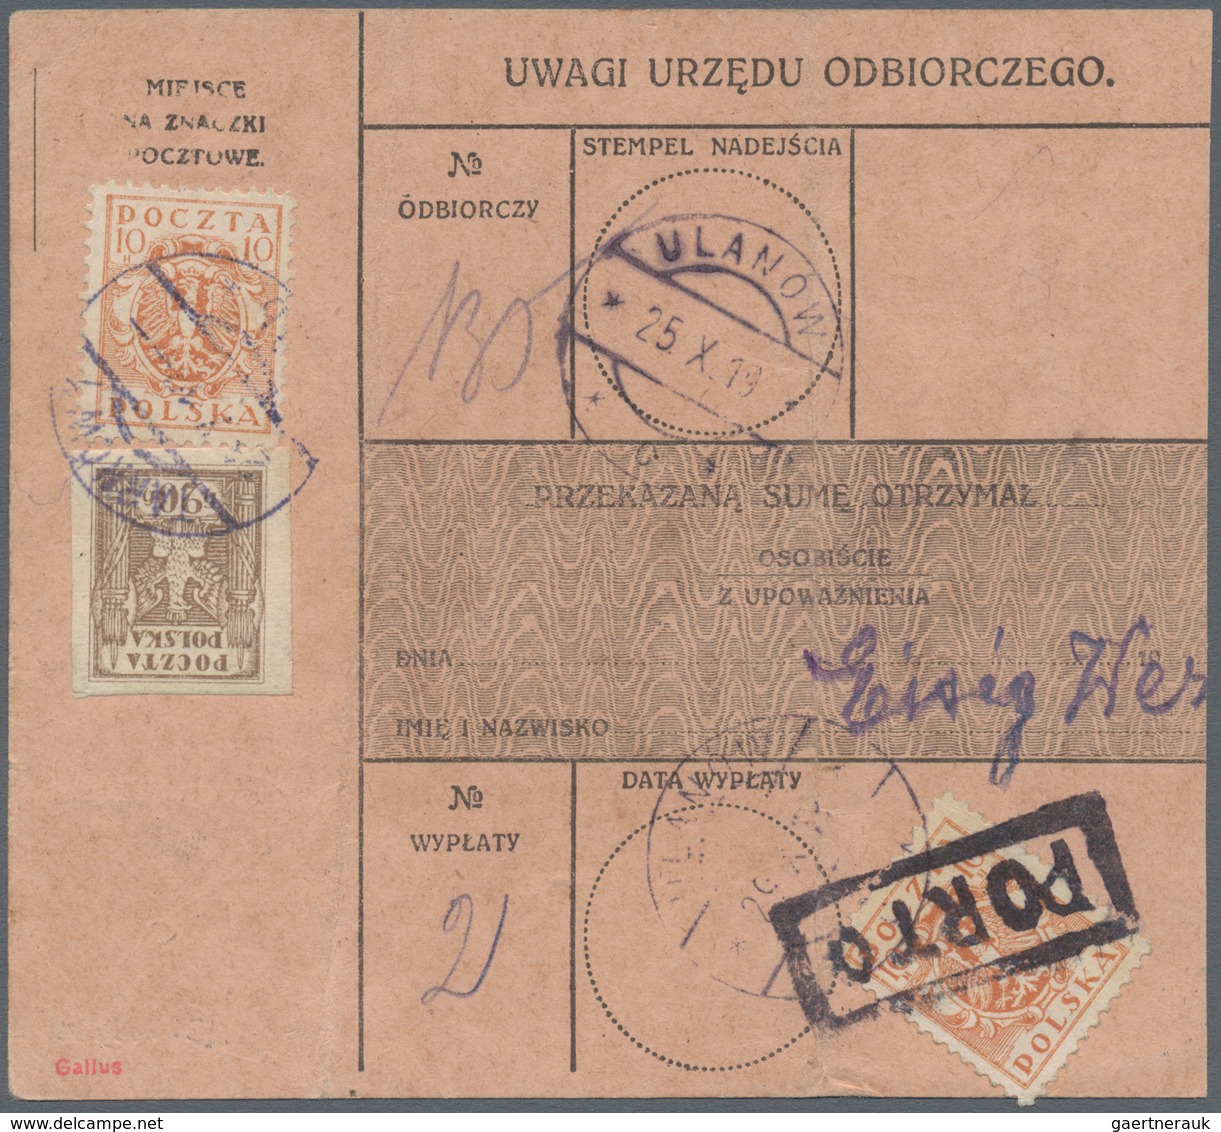 01572 Polen - Lokalausgaben 1915/19: 1919/1923 (ca): 132 postal orders franked with postage due stamps fro